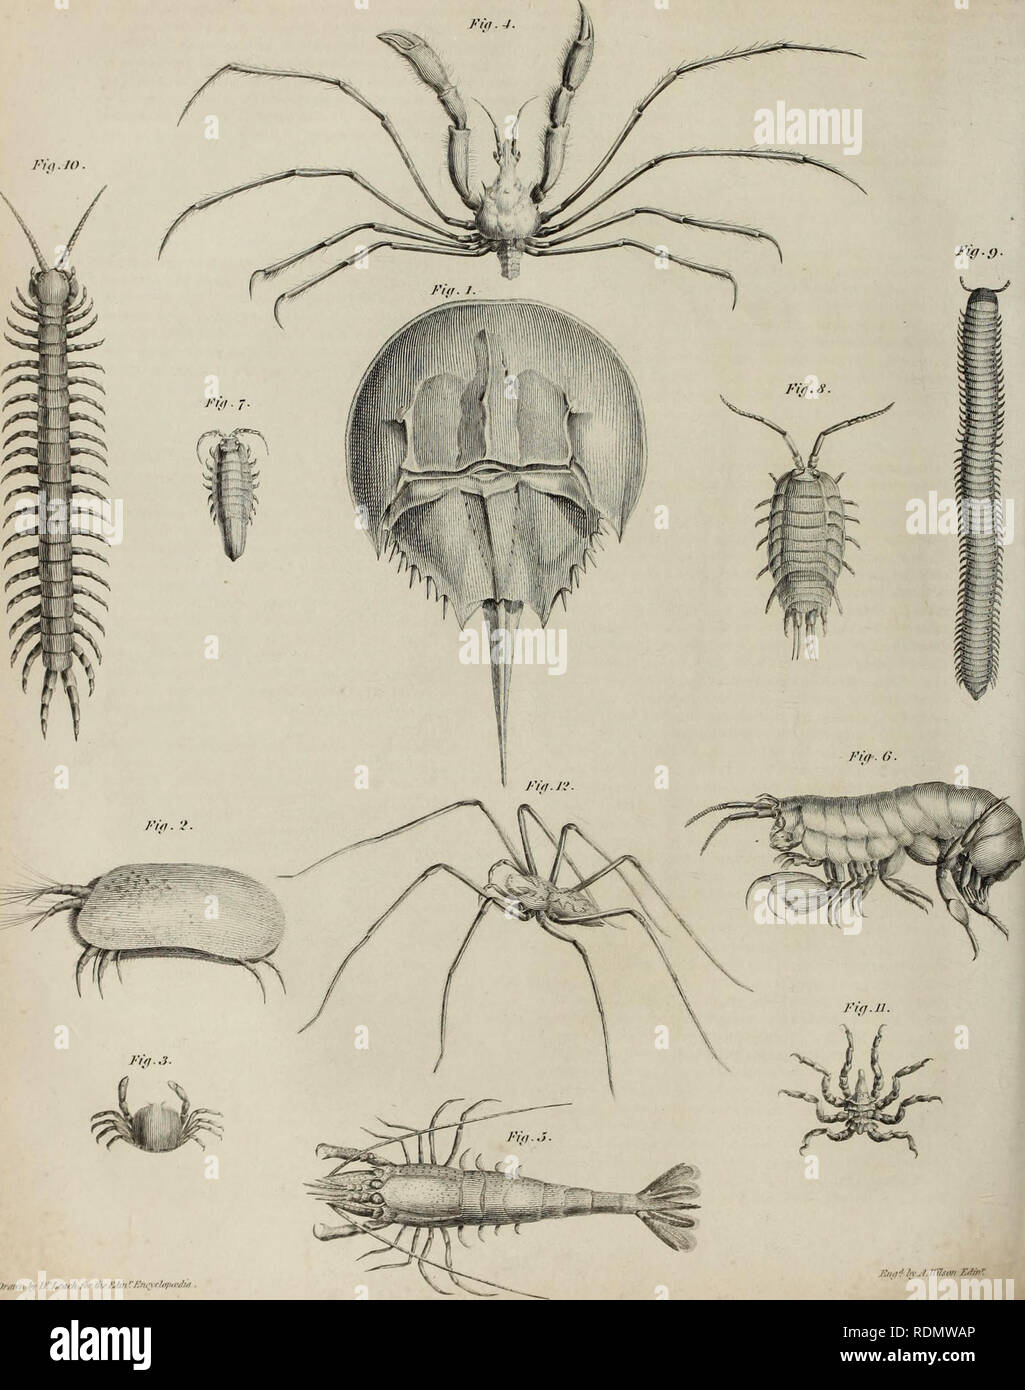 Edinburgh Encyclopedia Crustaceology Plate Ccxxi I A R H L Oram Ft W Rir Tubun V A A A Please Note That These Images Are Extracted From Scanned Page Images That May Have Been Digitally Enhanced For